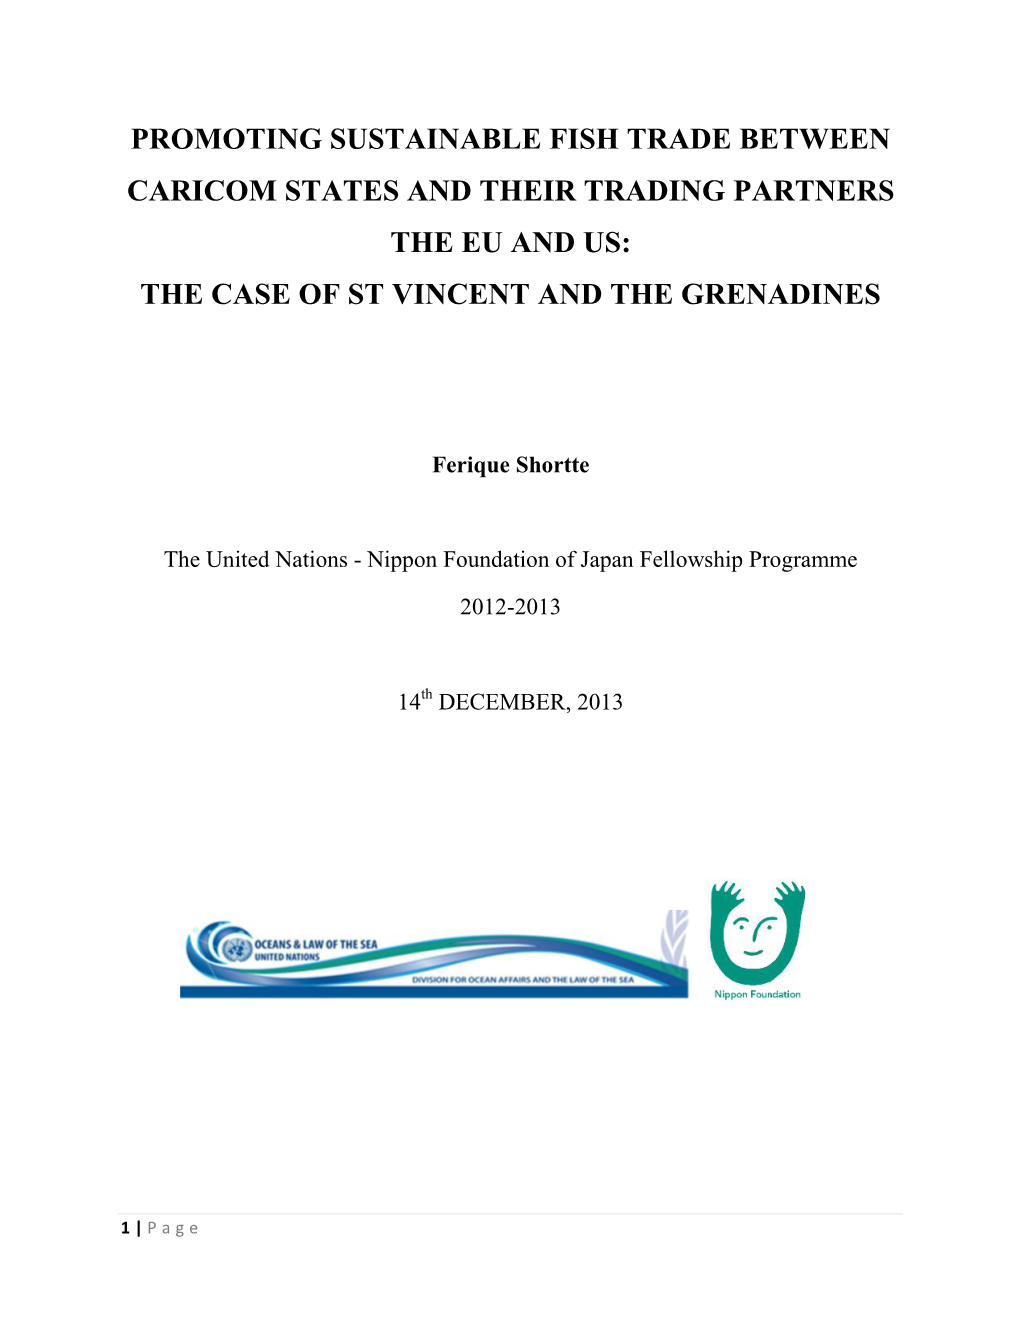 Promoting Sustainable Fish Trade Between Caricom States and Their Trading Partners the Eu and Us: the Case of St Vincent and the Grenadines